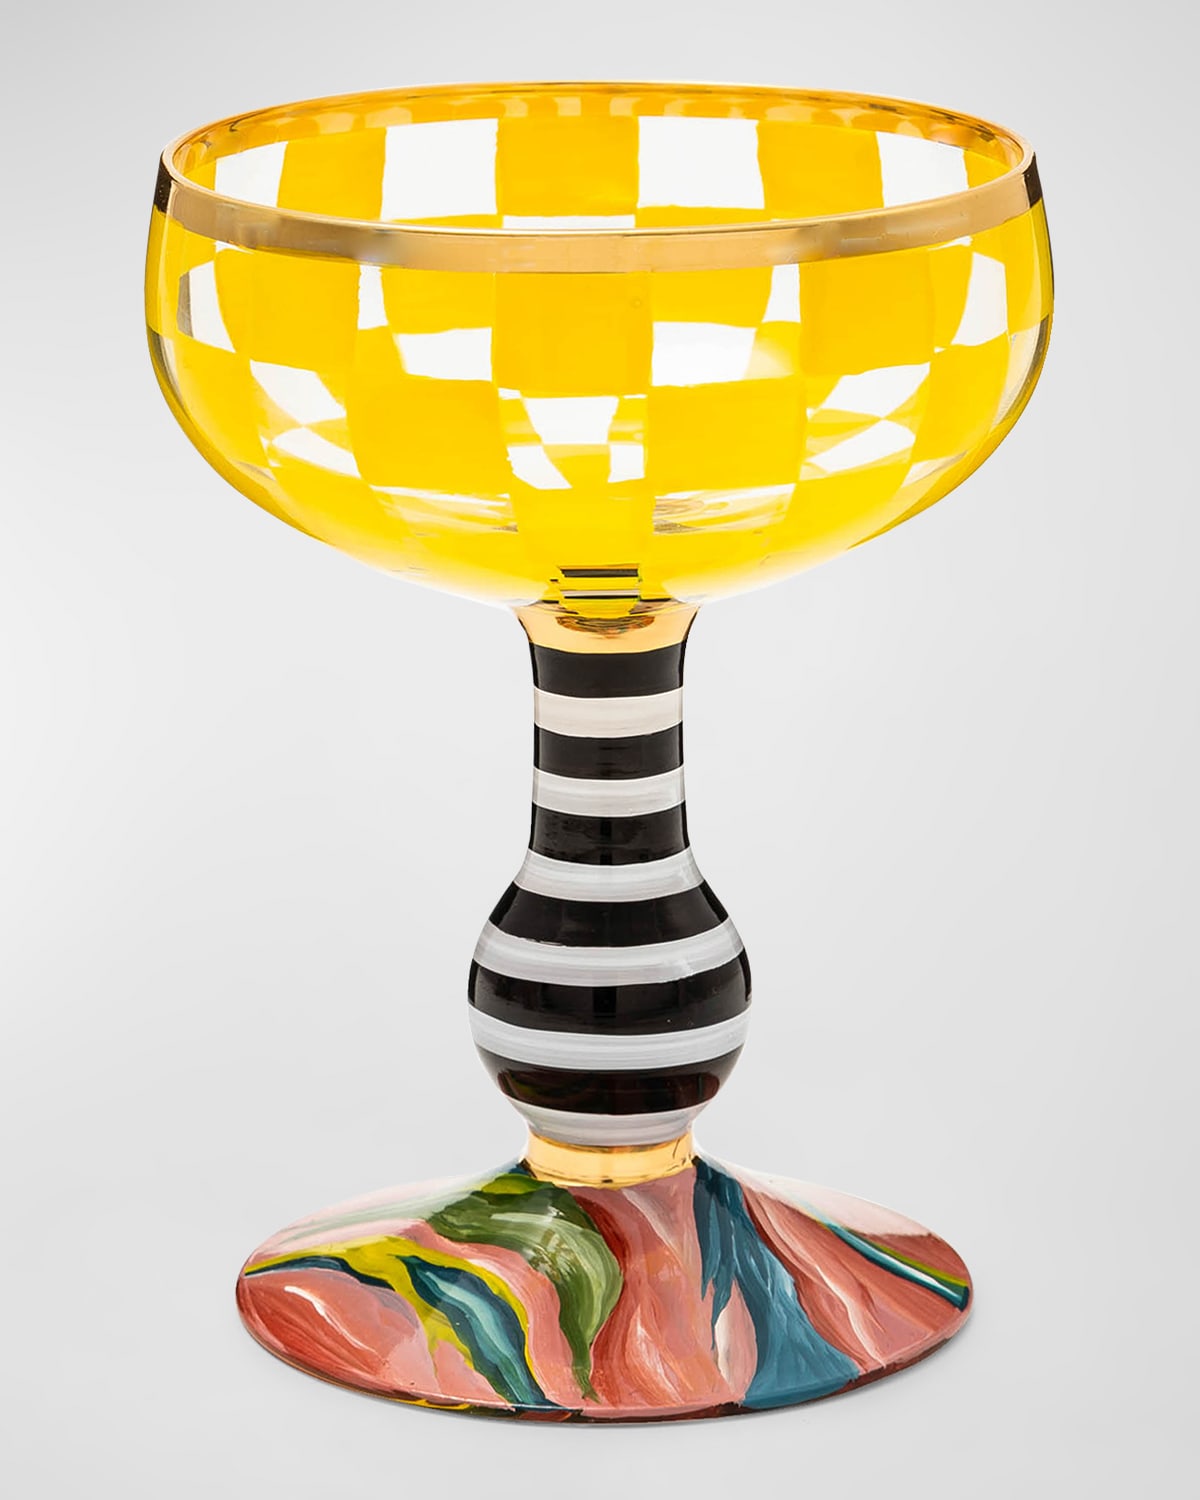 Mackenzie-childs Carnival Yellow Coupe Glass In Multi